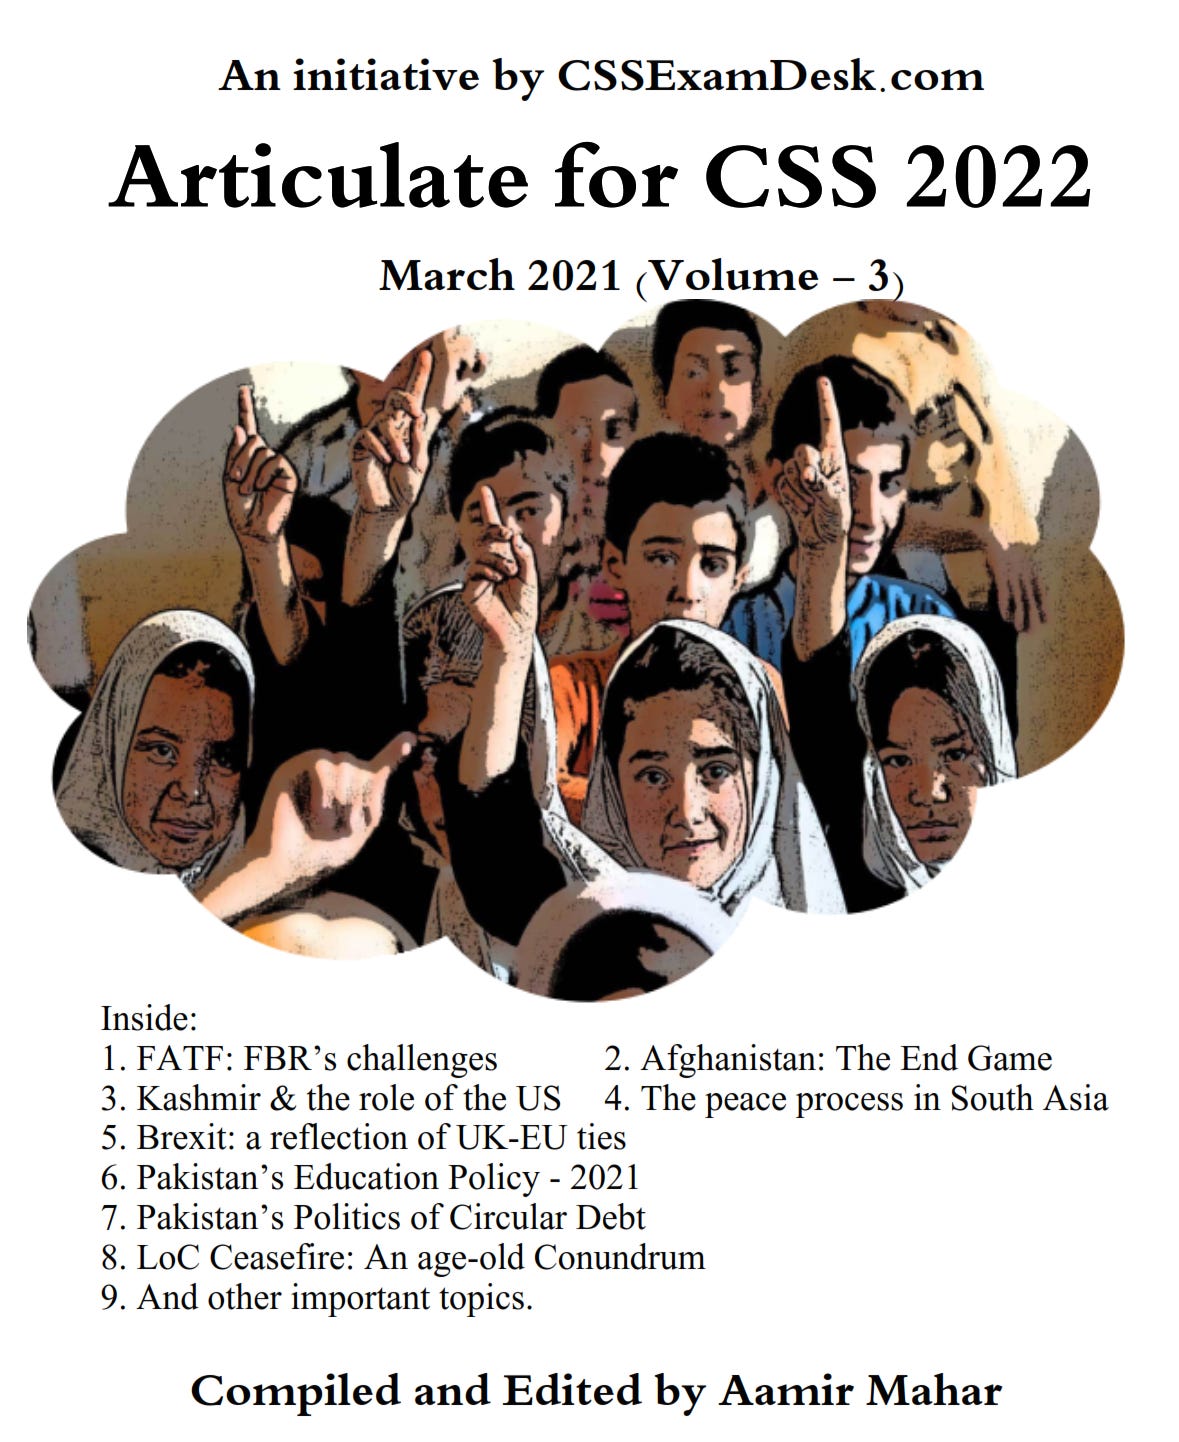 Rapid CSS 2022 17.7.0.248 download the new for mac